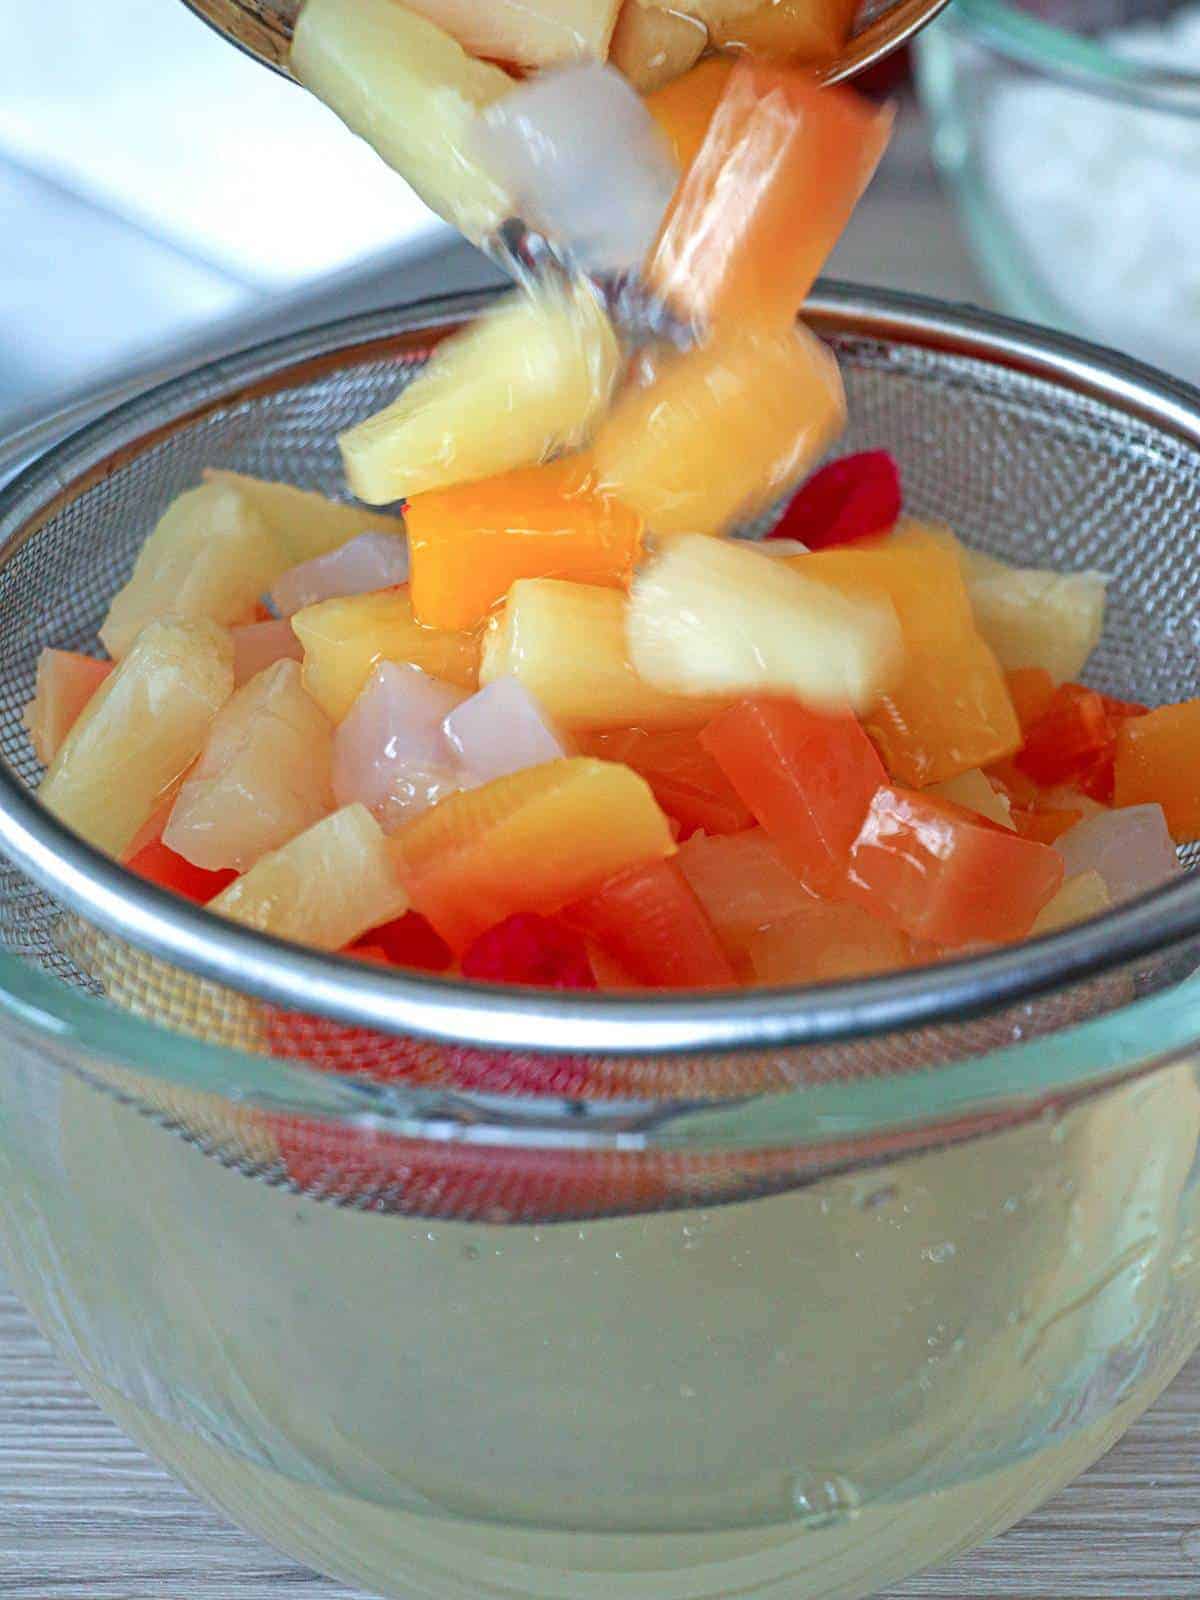 draining canned fruit cocktail in a bowl using a fine-mesh sieve